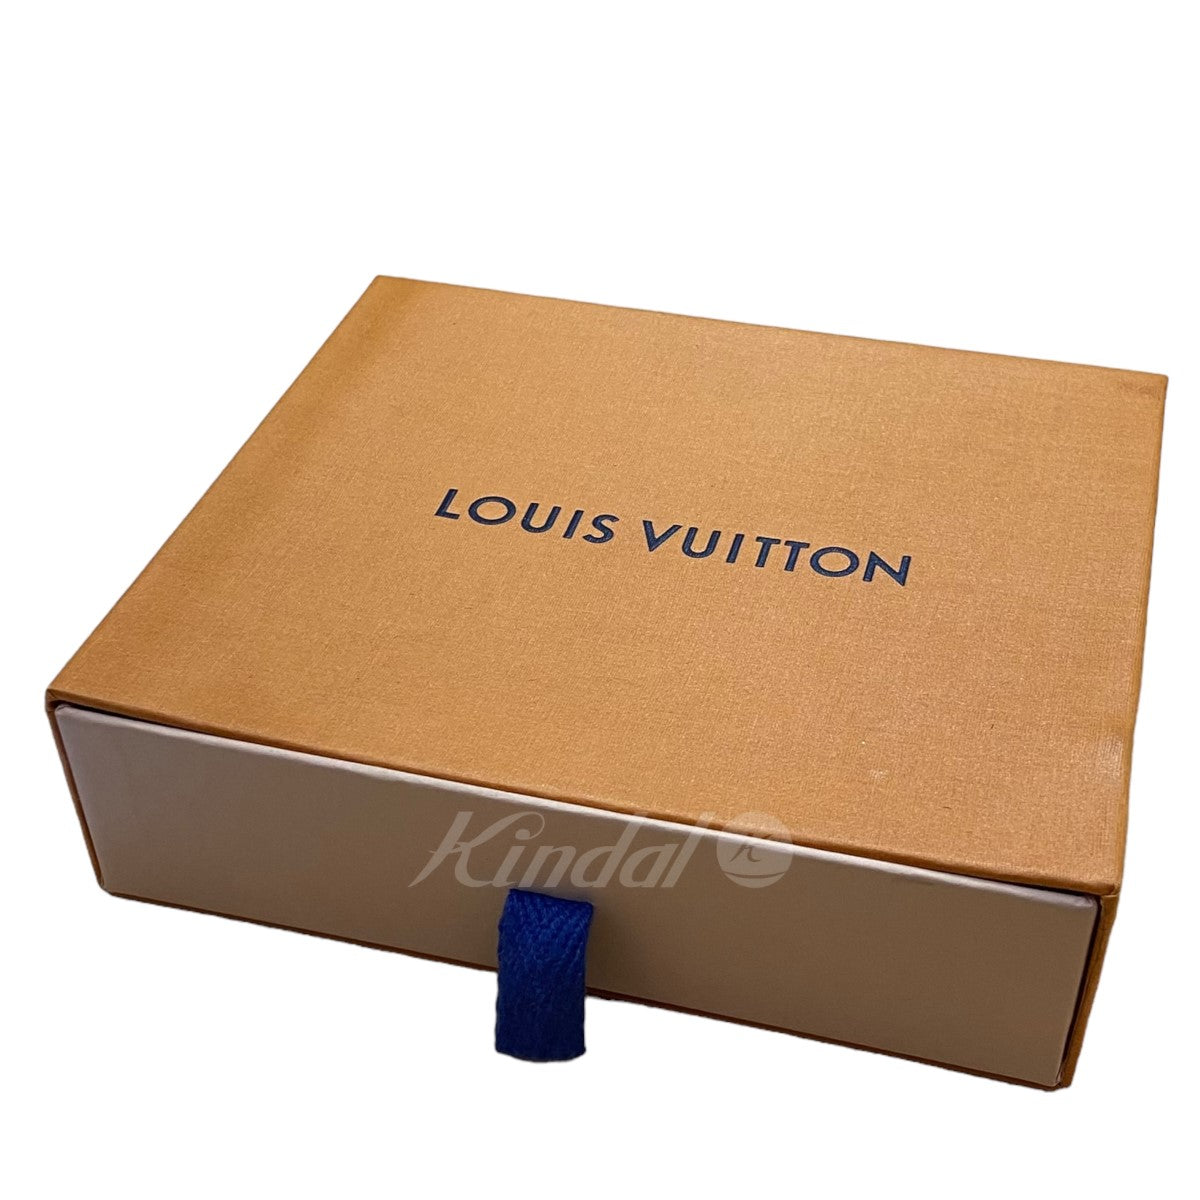 LOUIS VUITTON(ルイヴィトン) コリエモノグラムチェーンネックレス ...